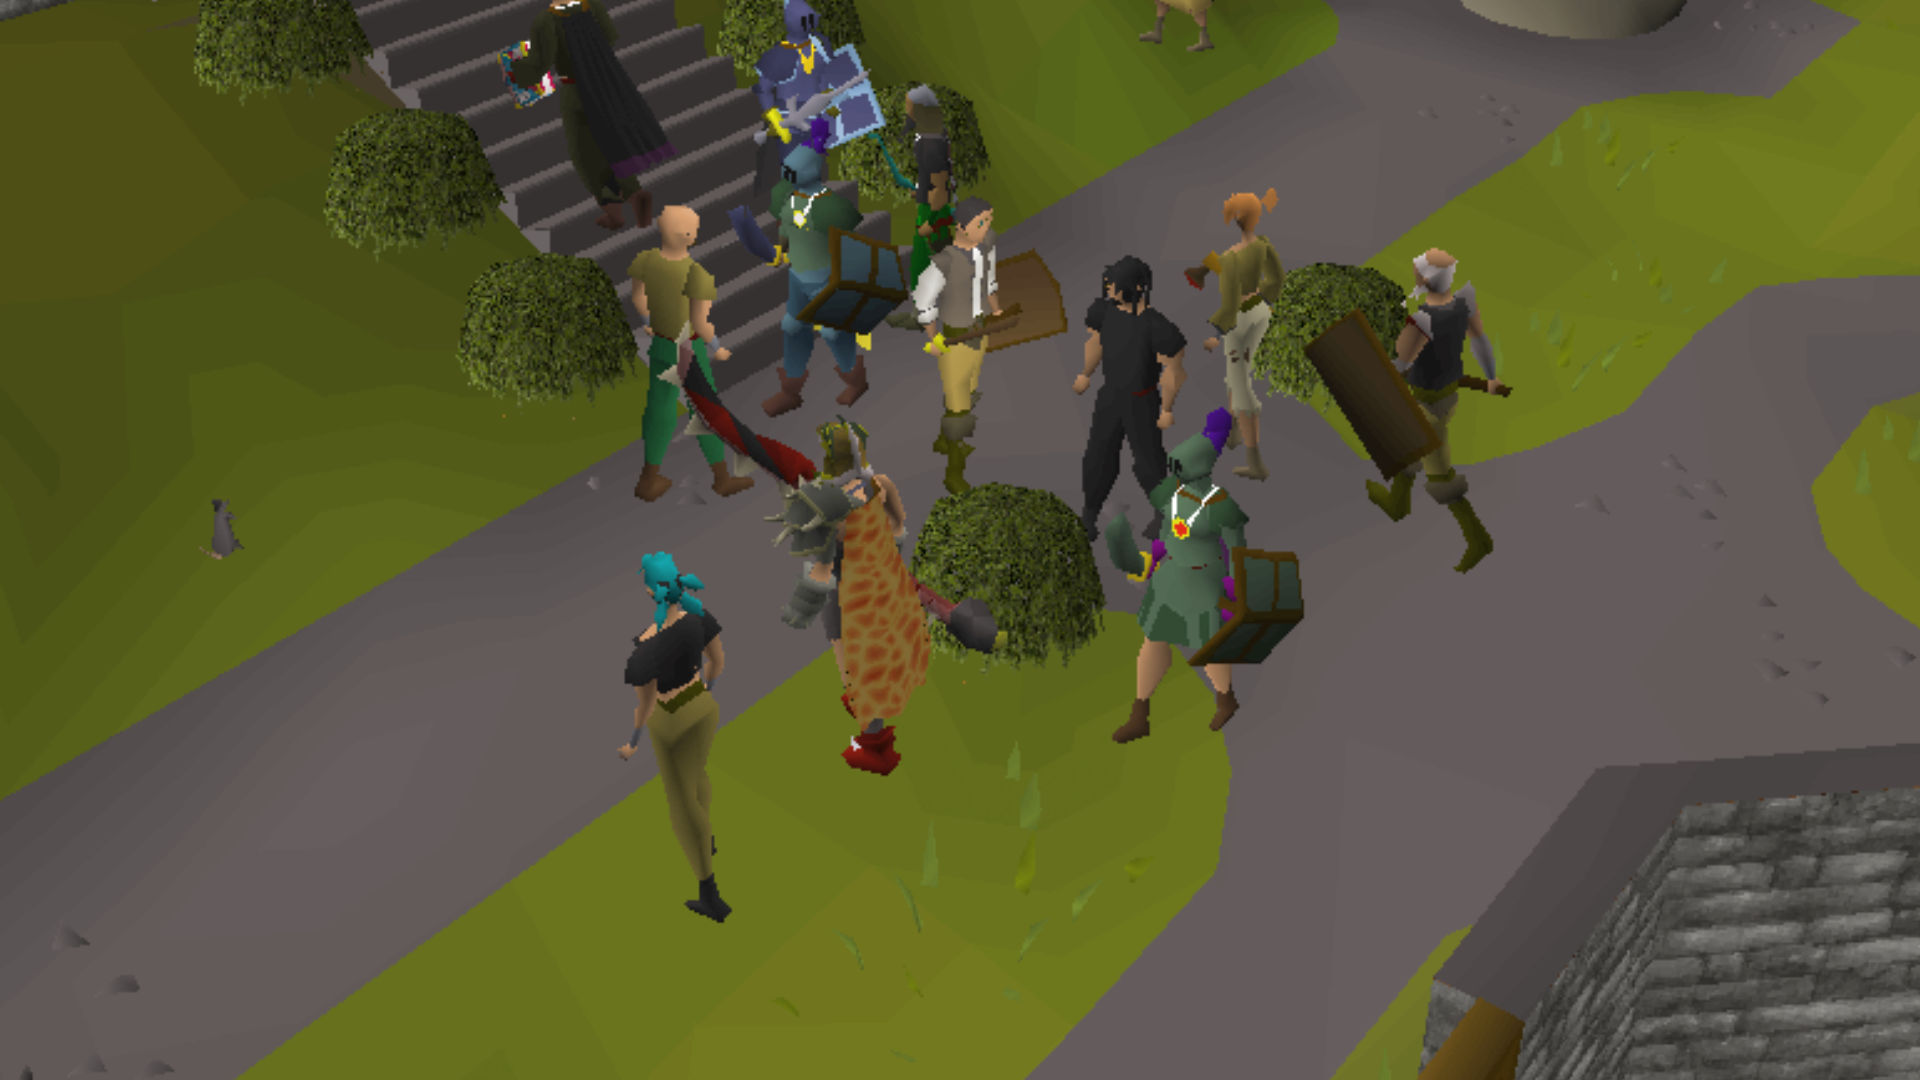 Best mobile MMORPGs: Old School RuneScape. Image shows a group of slightly polygonal characters on a path near some grass.